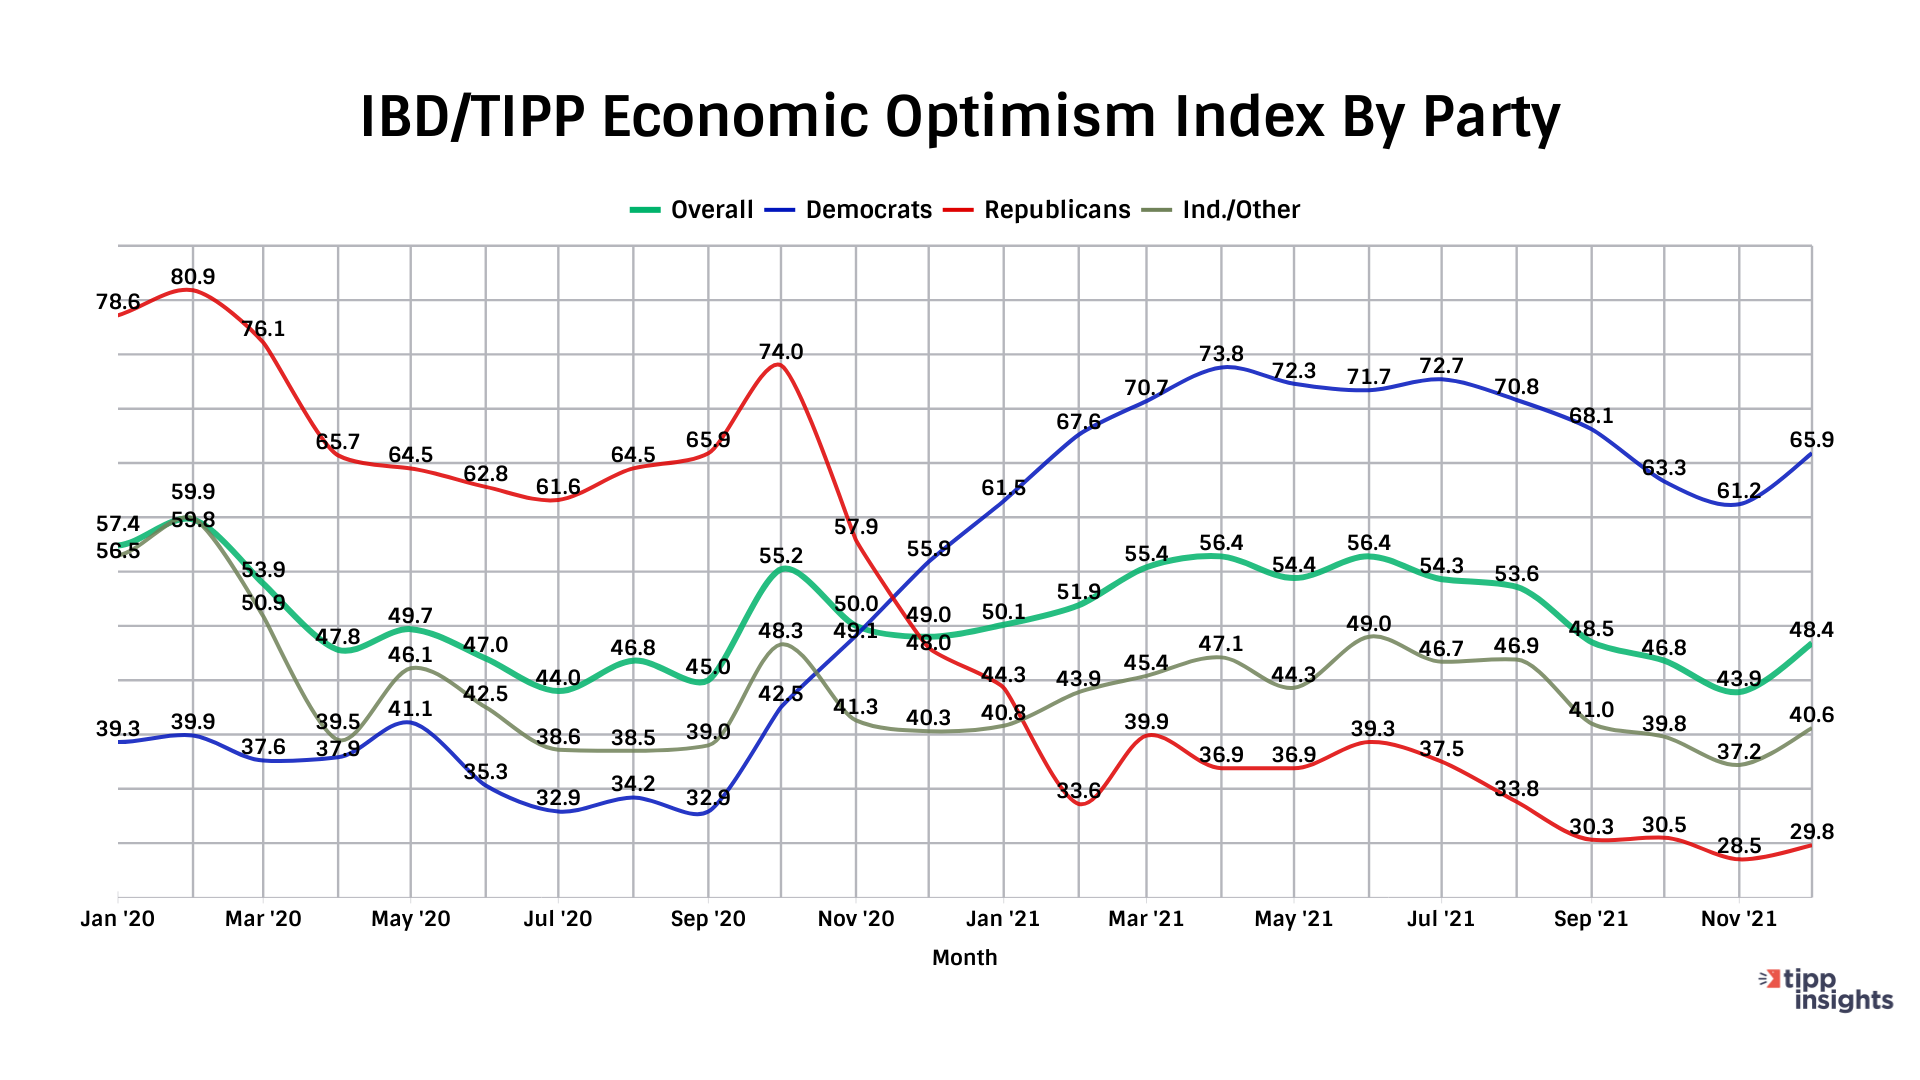 IBD/TIPP Poll Results: Economic optimism by party